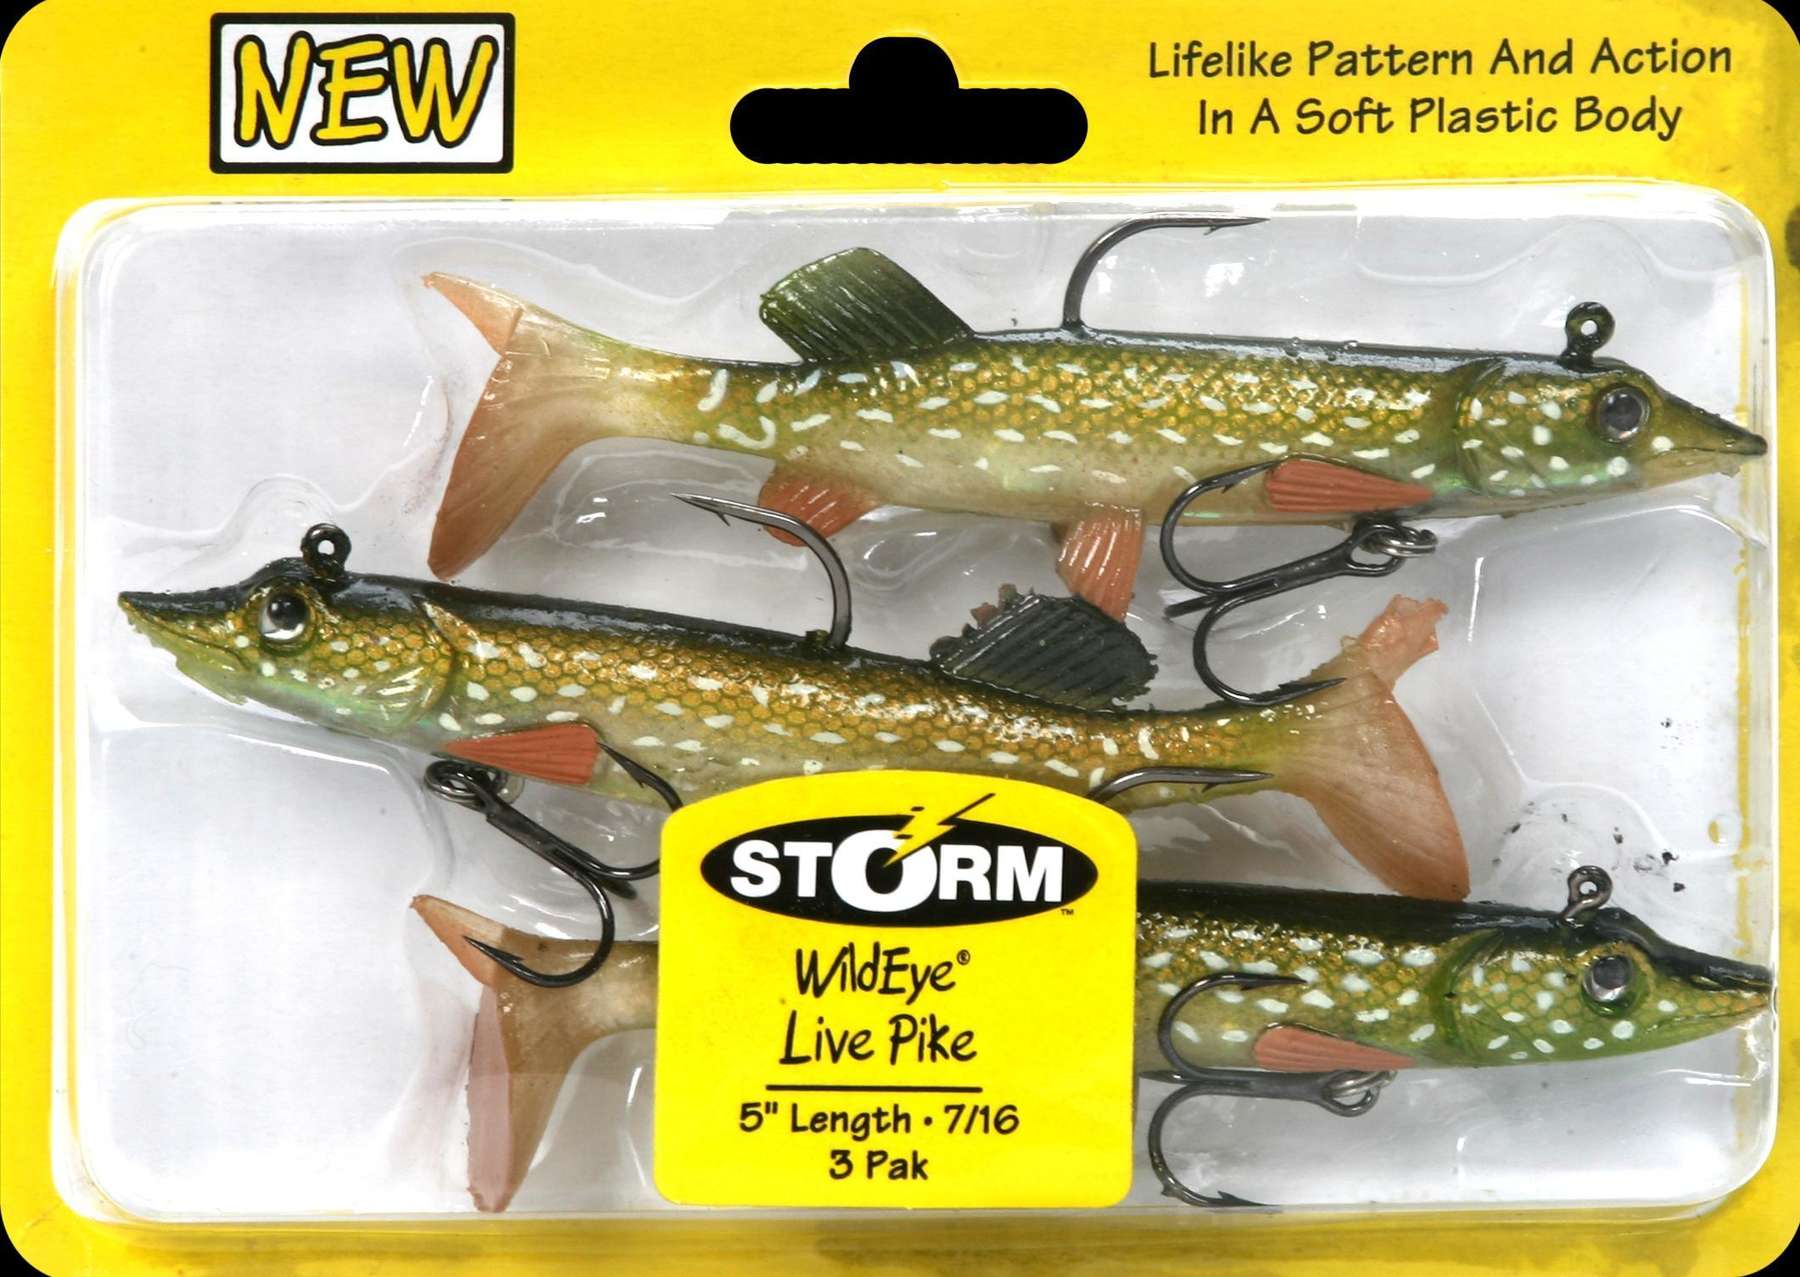 Storm Wildeye Live Pike Fishing Lure 3 Pack 5'' 7/16 Ounce - Hughly  Successful, etc at Outdoor Shopping